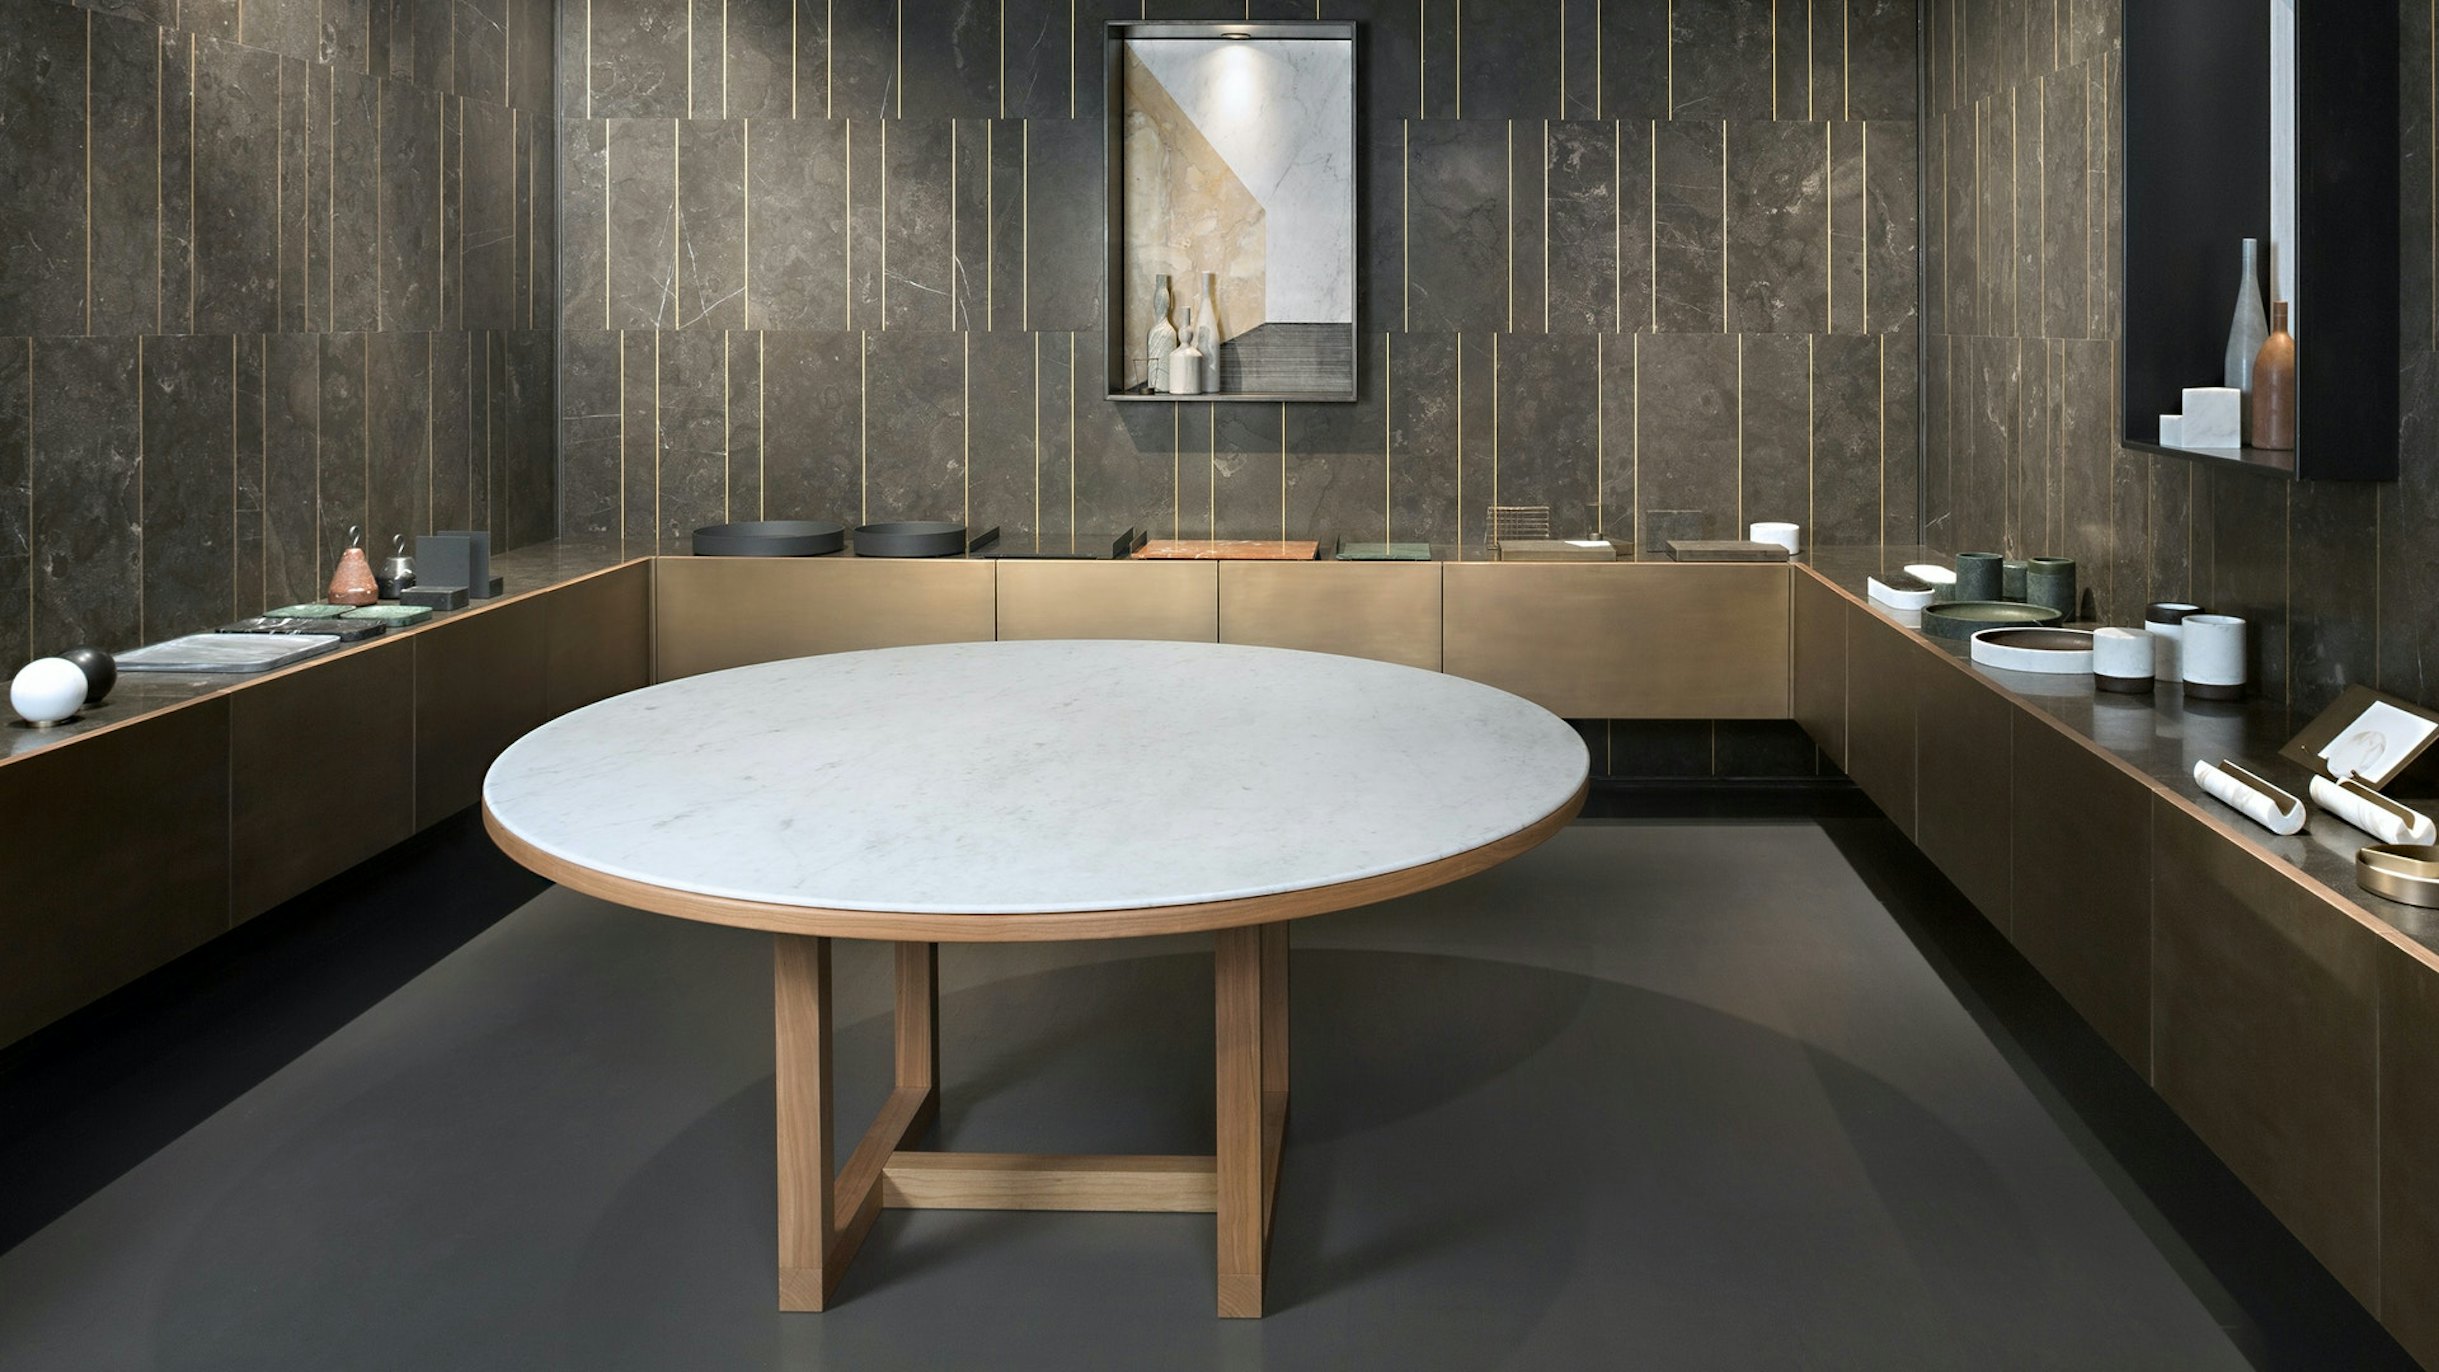 'Span' Indoor Dining table | Interactive Image